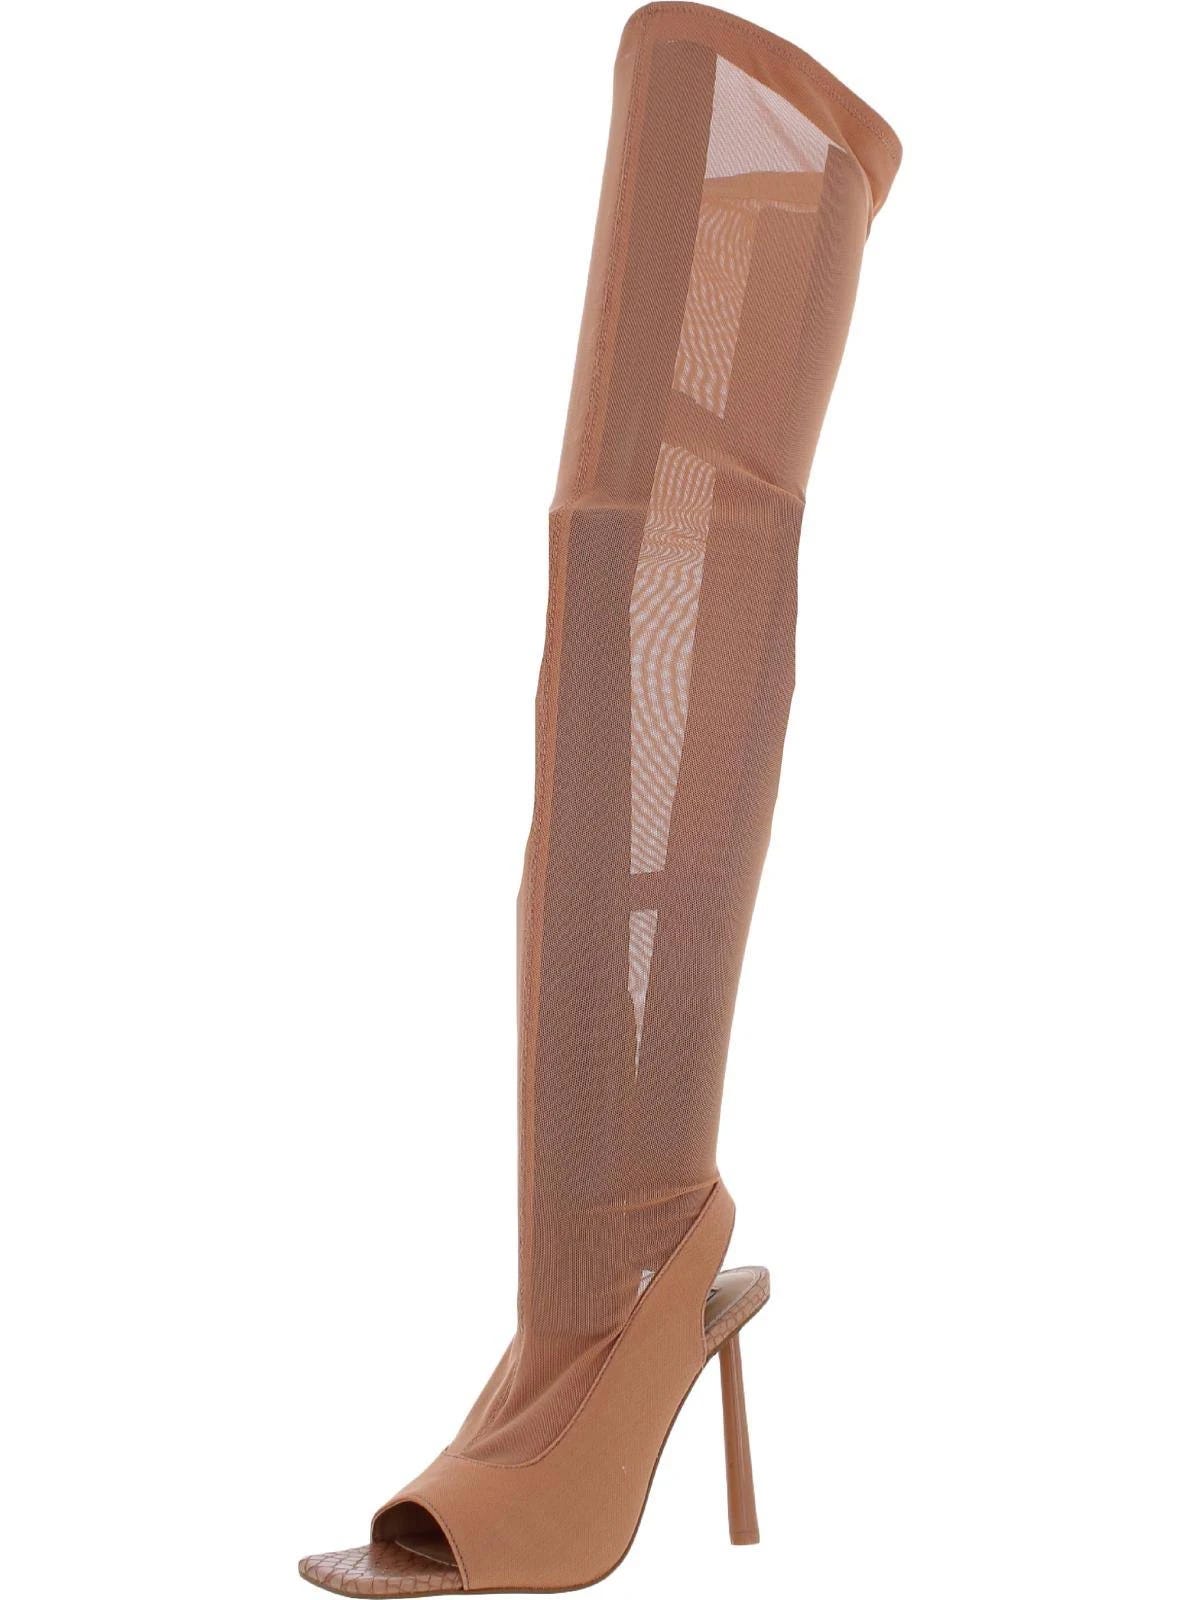 Chic Nude Thigh-High Mesh Boots by Steve Madden | Image